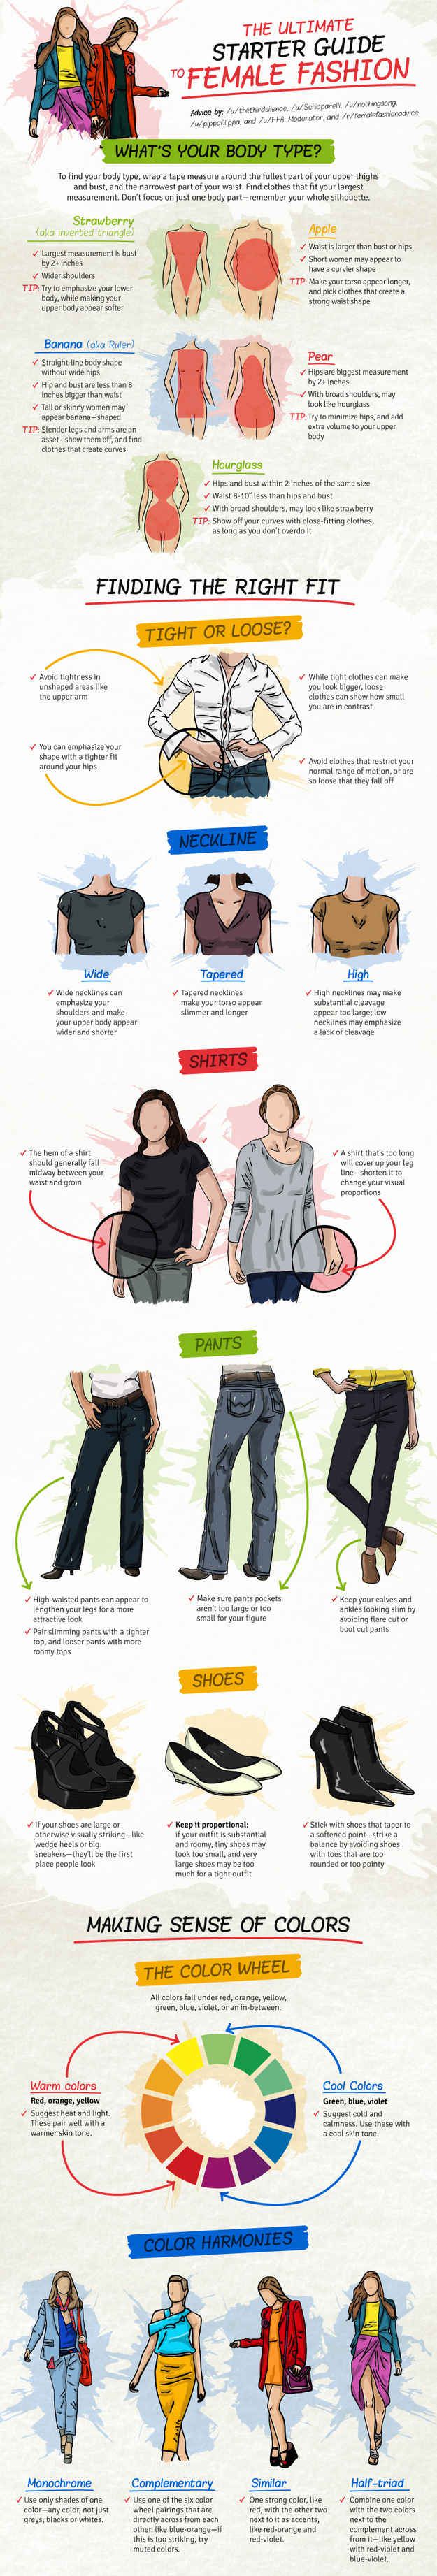 The Ultimate Starter Guide to Female Fashion